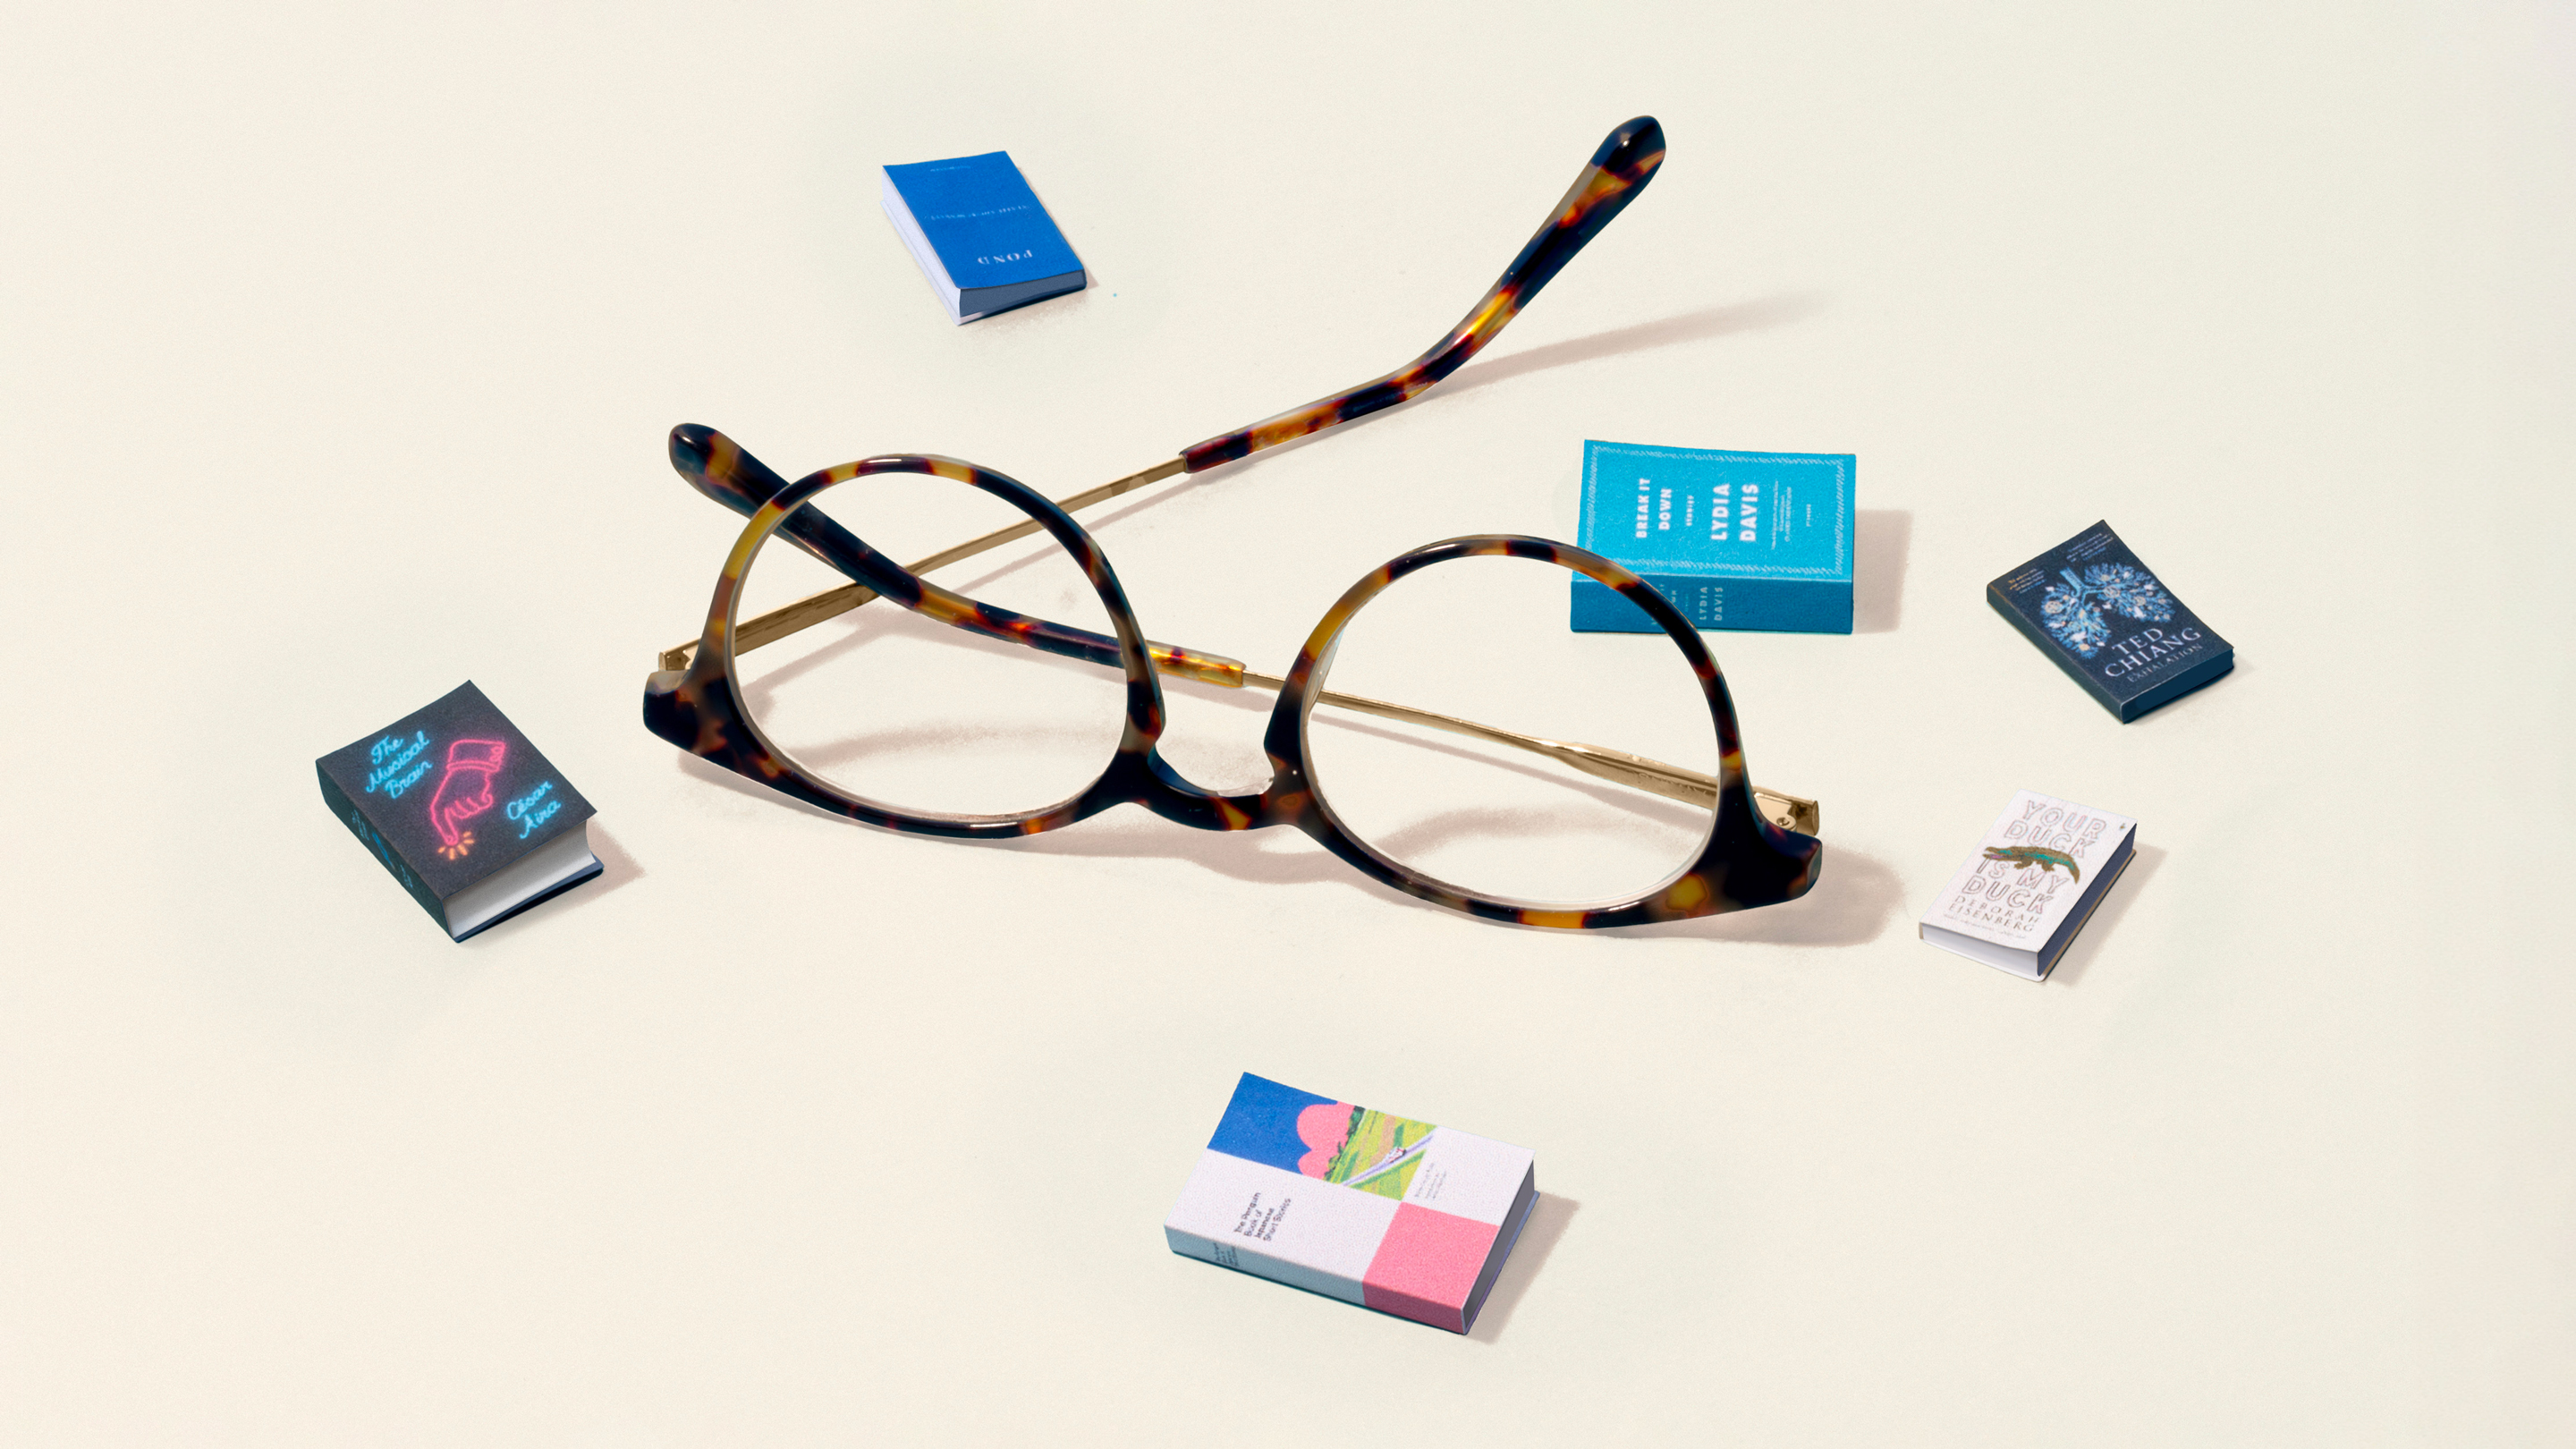 A pair of glasses rests next to different short-story book covers